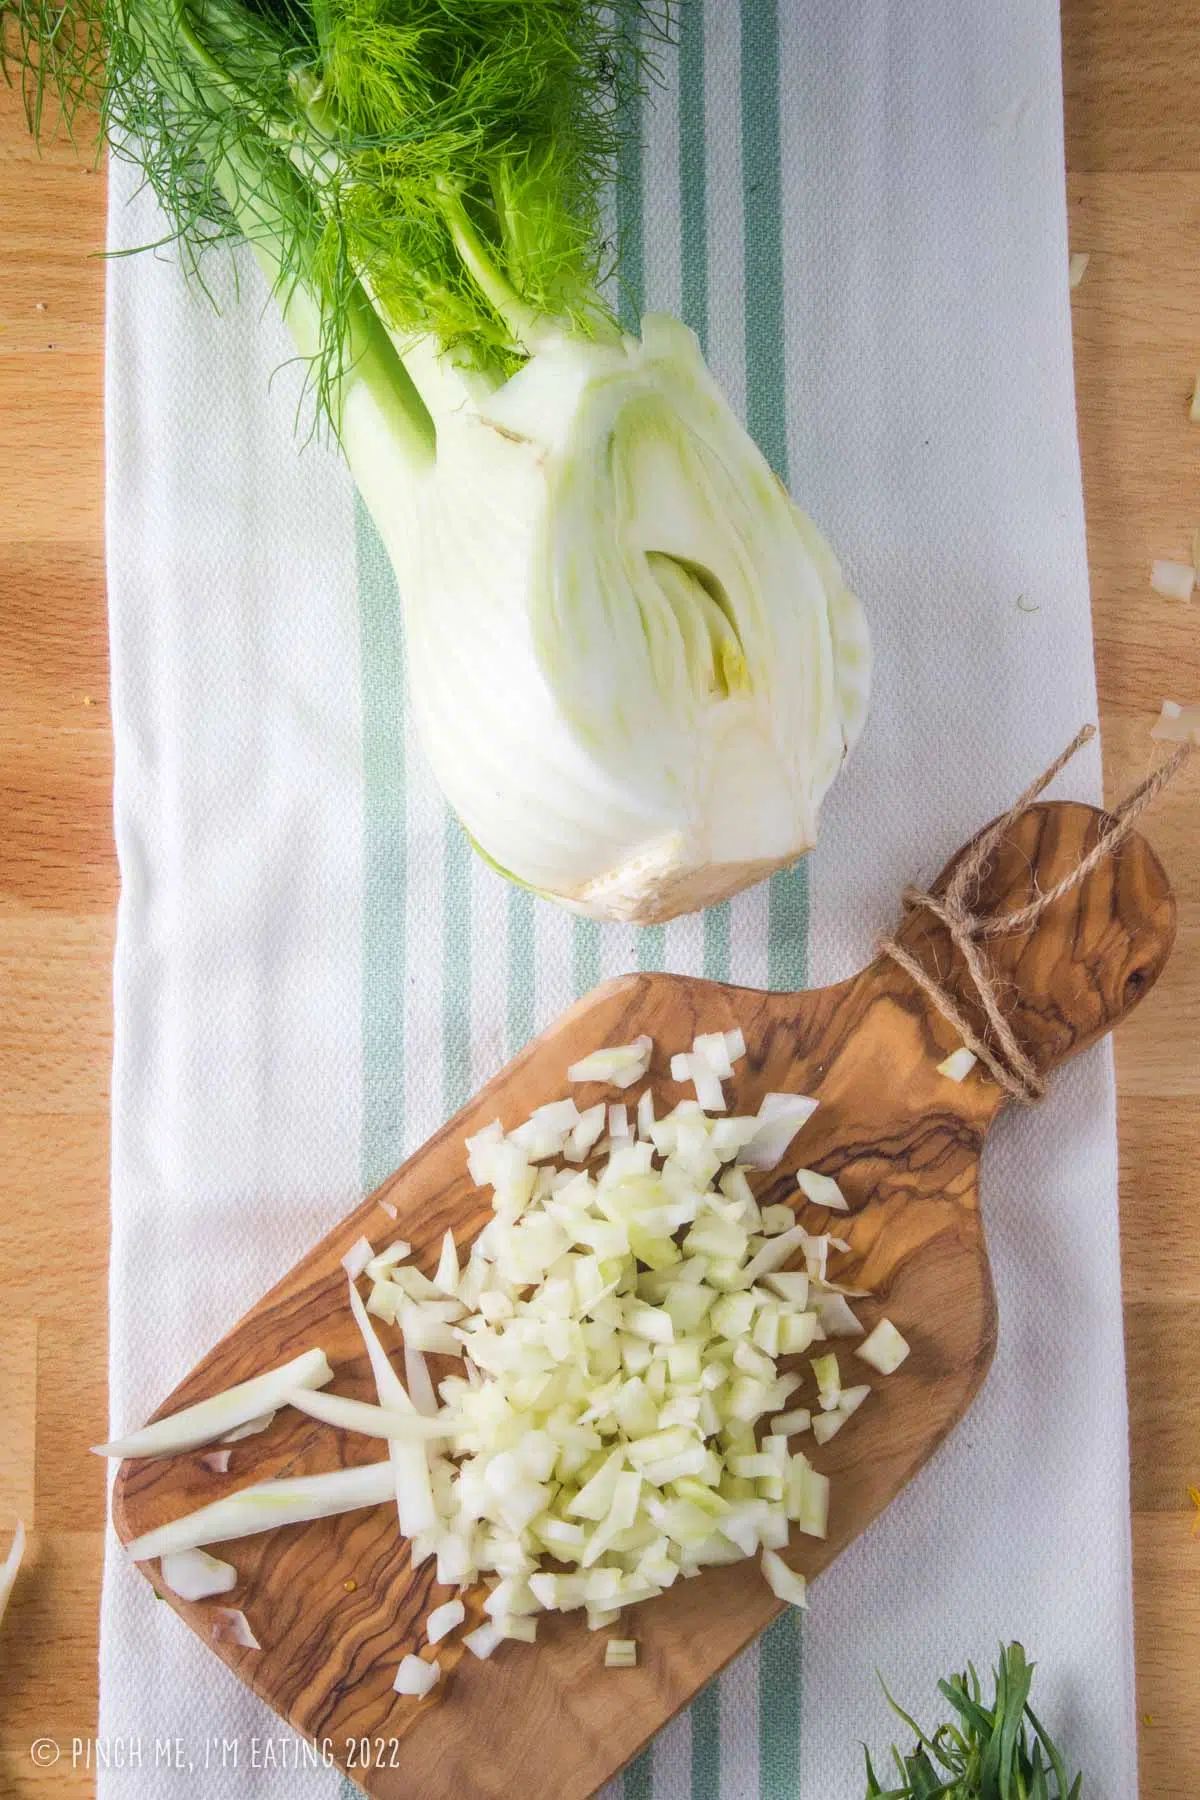 Overhead view of a bulb of fresh fennel on a kitchen towel above a cutting board with finely diced fennel bulb.